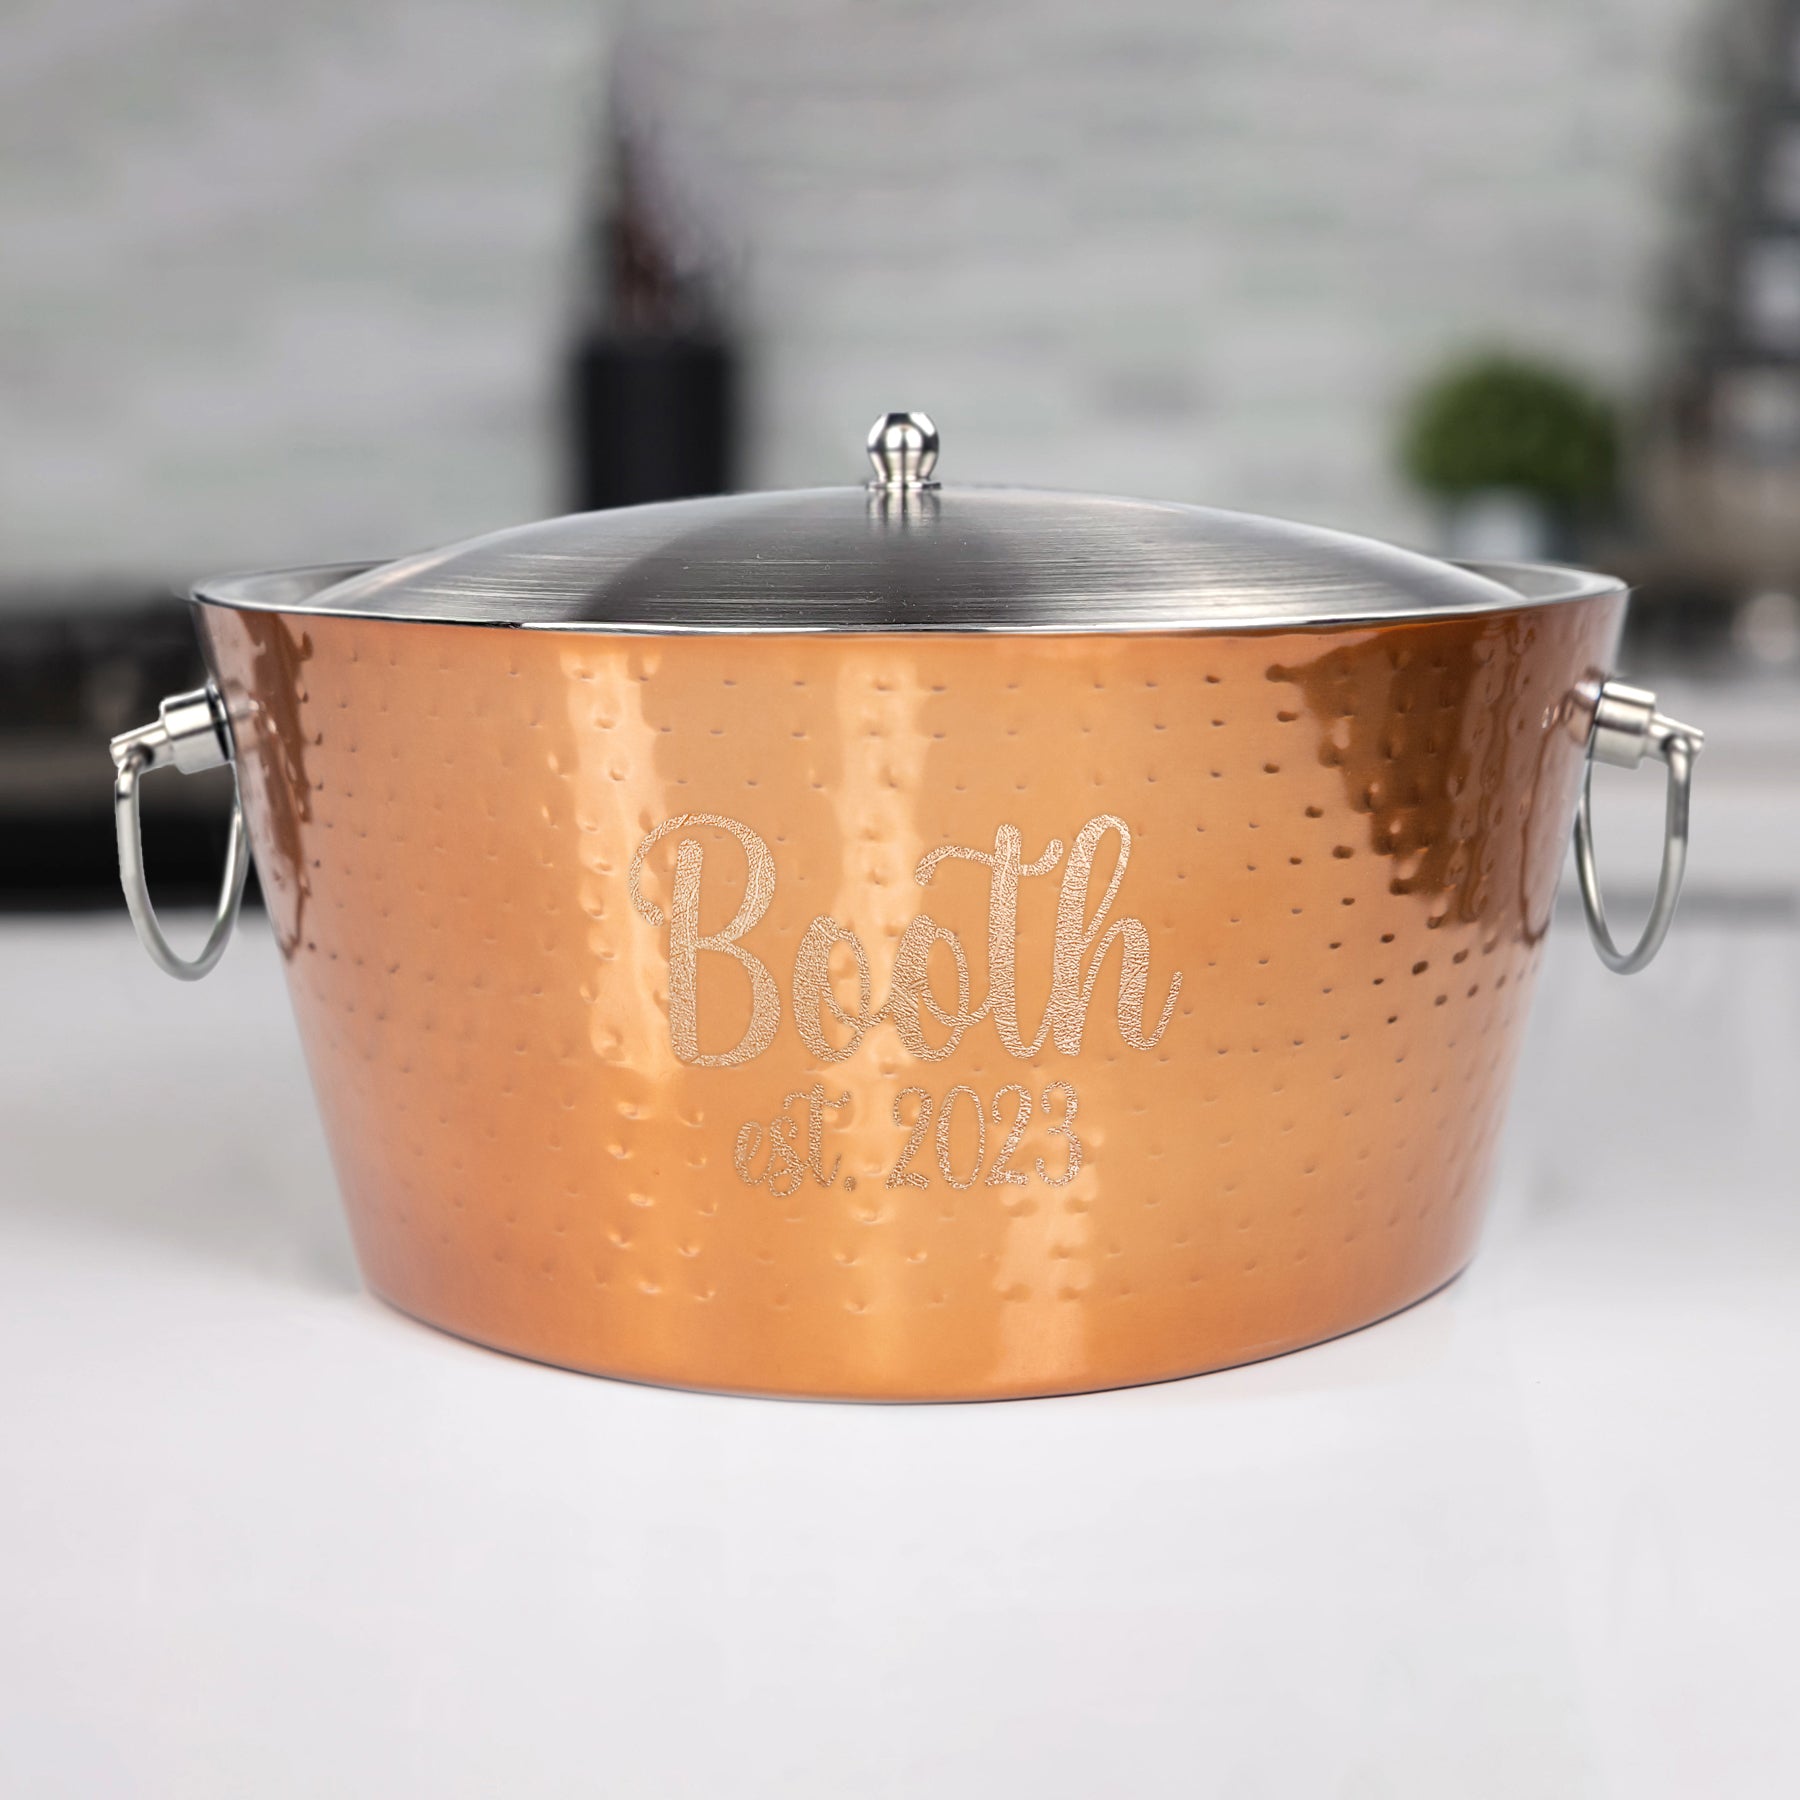 Hammered Metal Ice Bucket with Ice Scoop - Threshold 1 ct